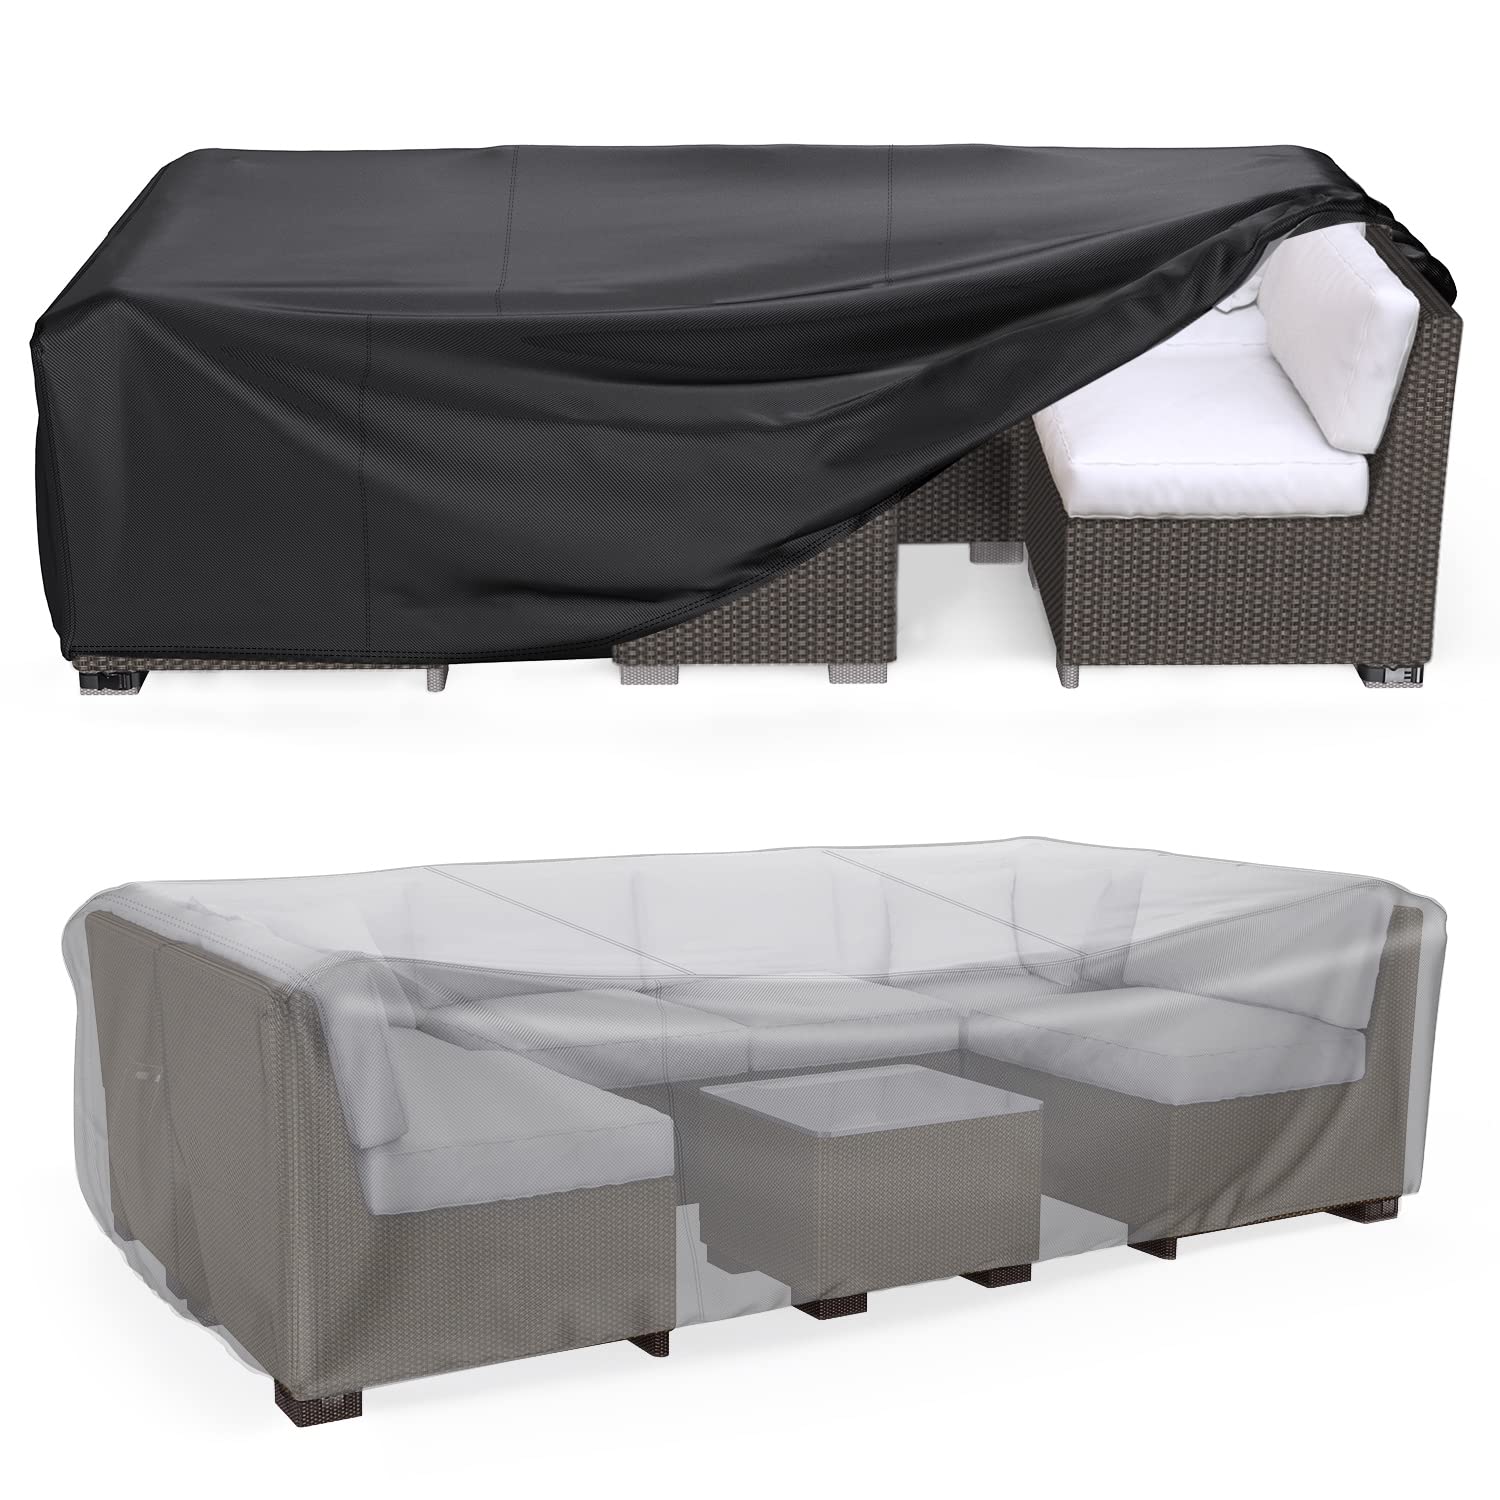 What To Do With Patio Furniture Cover